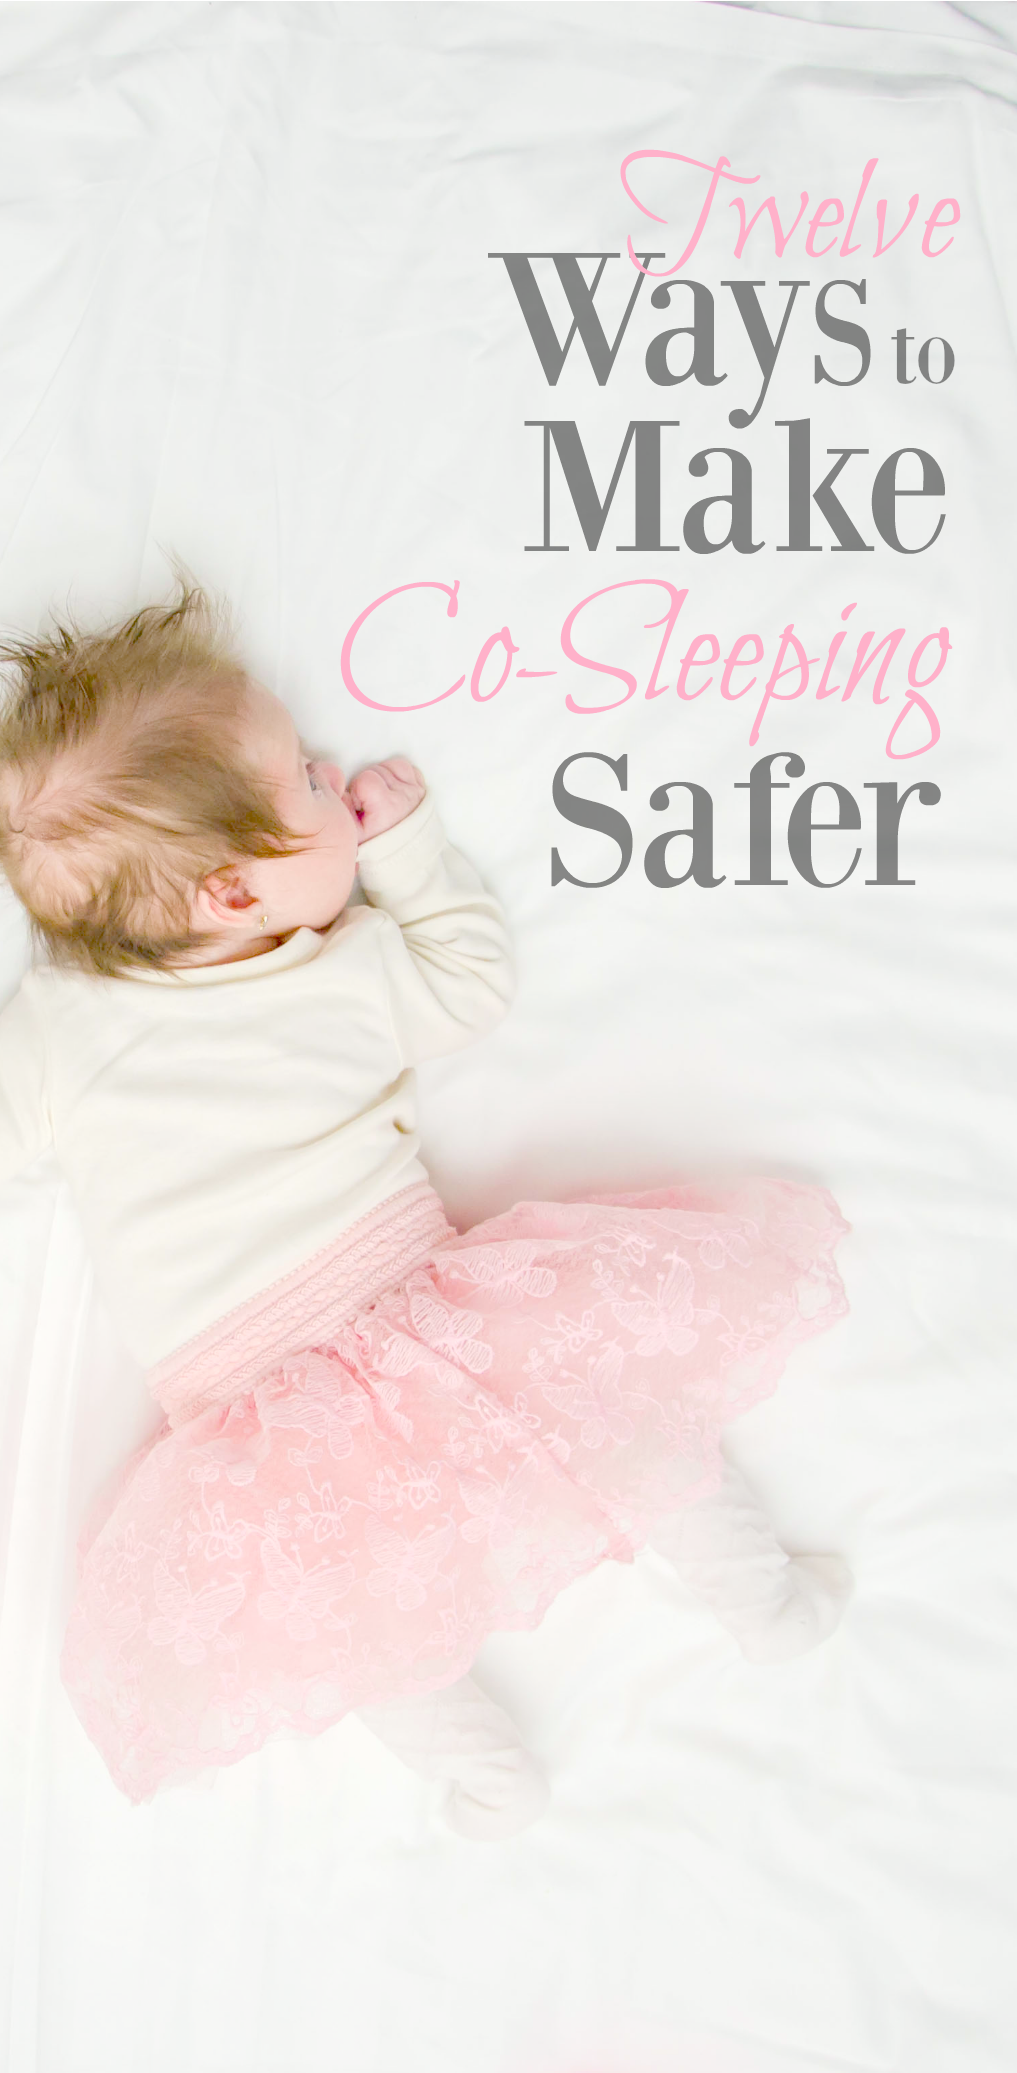 Knowing how to co-sleep with your baby is really important...especially if it's the only way for the two of you to get sleep! Follow these steps to make sure your co-sleeping arrangement is as safe as it can be.